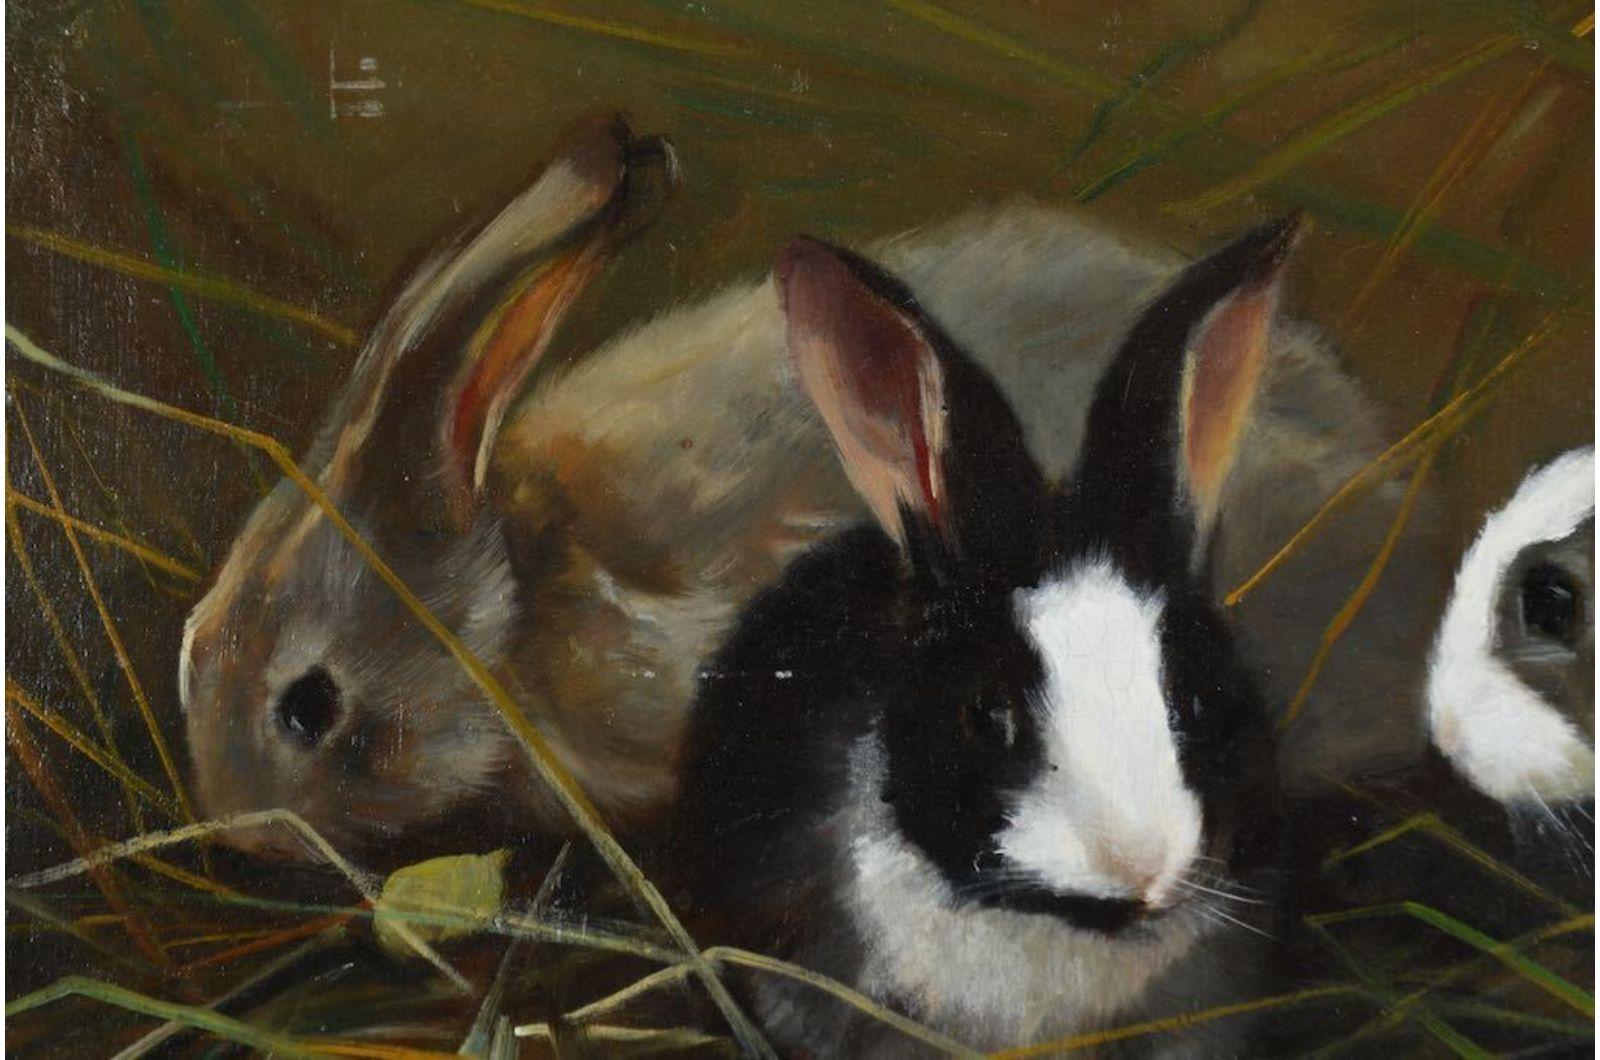 This is an original oil painting by Italian artist Giovanni Sanvitale, featuring a charming scene of two rabbits in a field. The painting is executed in a loose, impressionistic style, with vibrant brushstrokes and a warm color palette. The work is